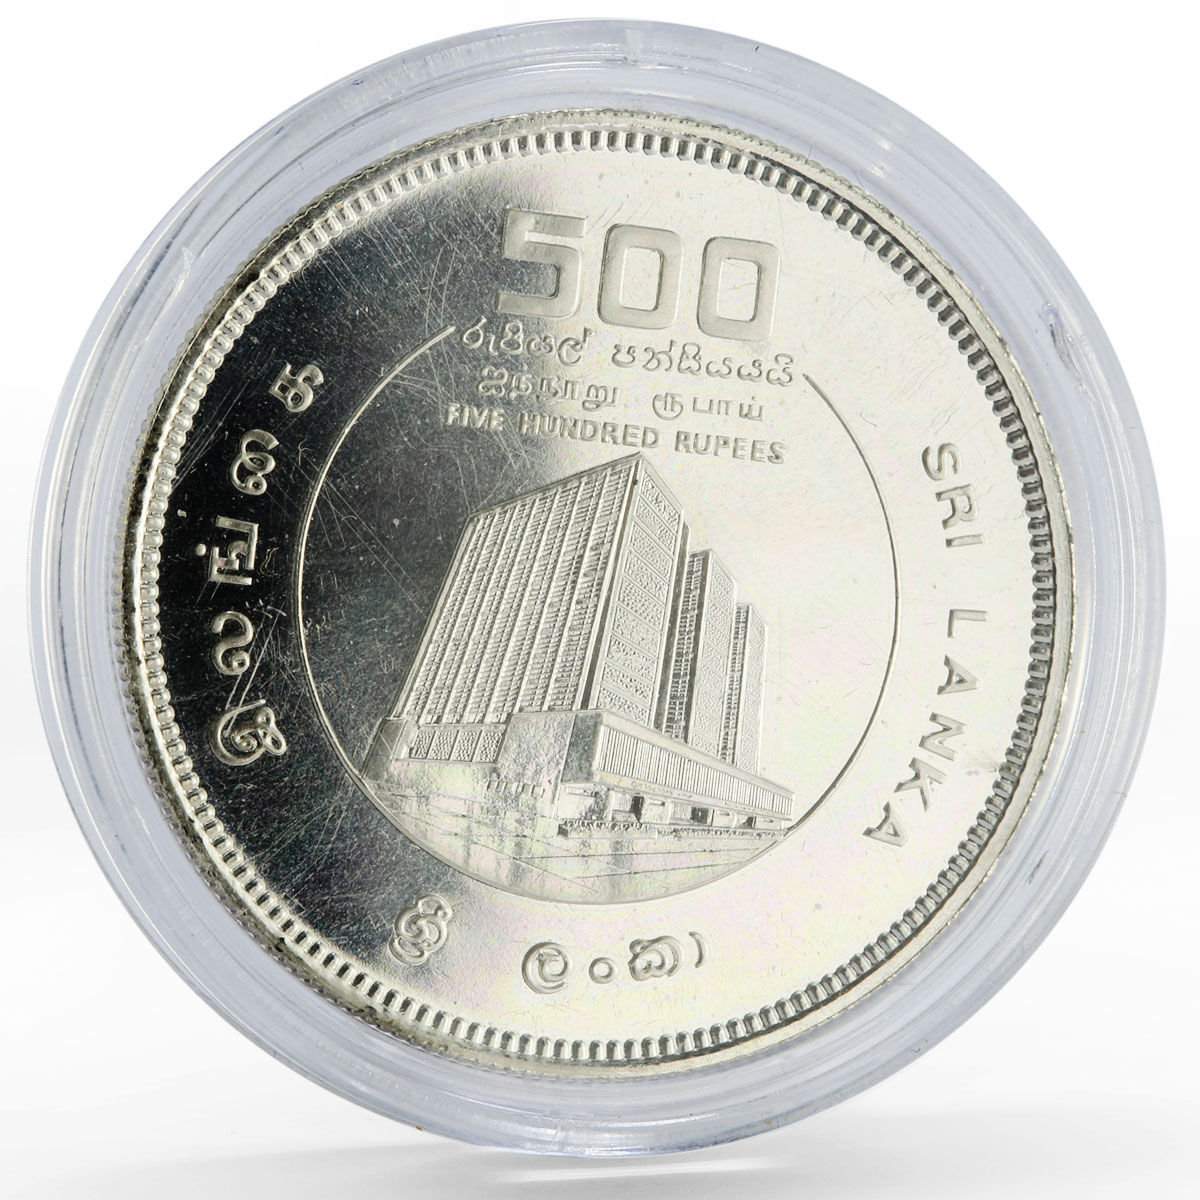 Sri Lanka 500 rupees 40th Anniversary of the National BAnk silver coin 1990